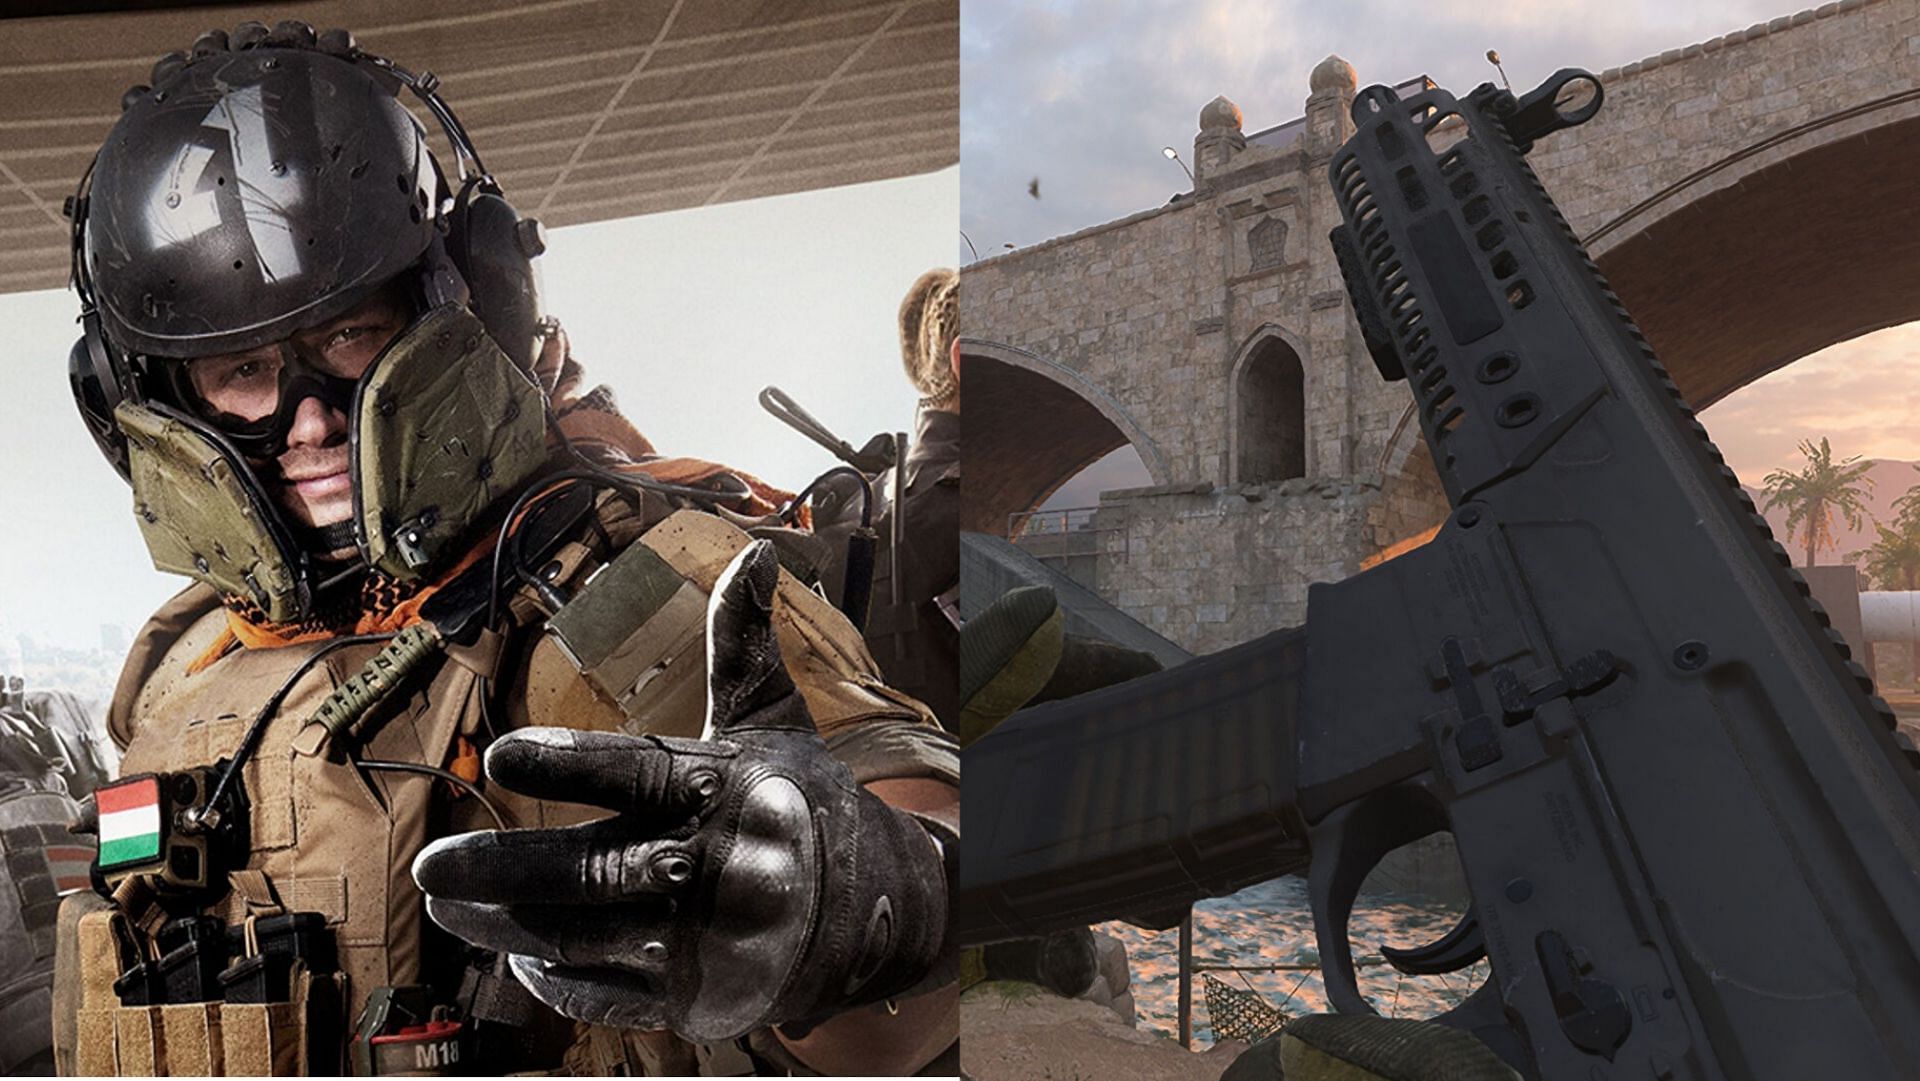 The M13B Assault Rifle is found in the DMZ mode (Images via Activision)